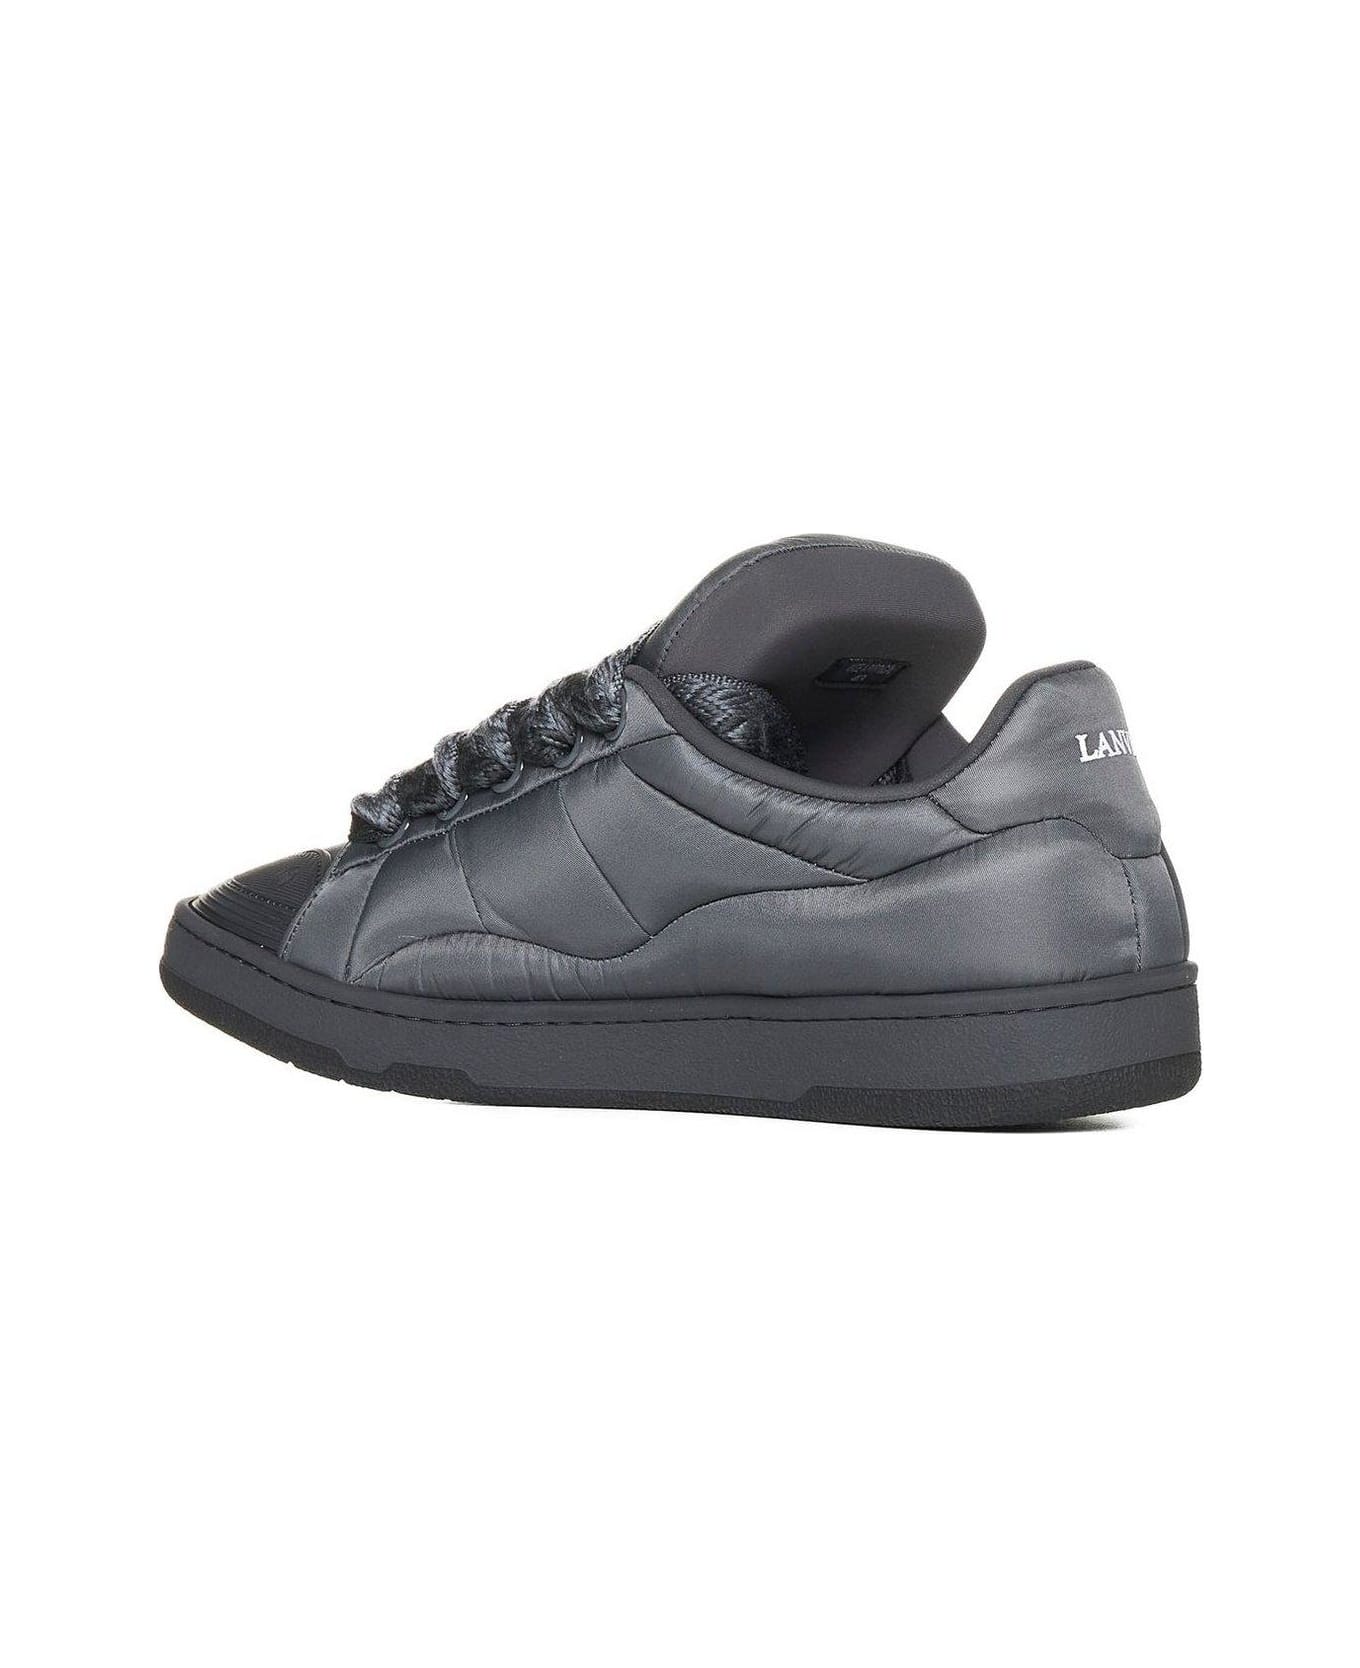 Lanvin Round Toe Lace-up Sneakers - Loden